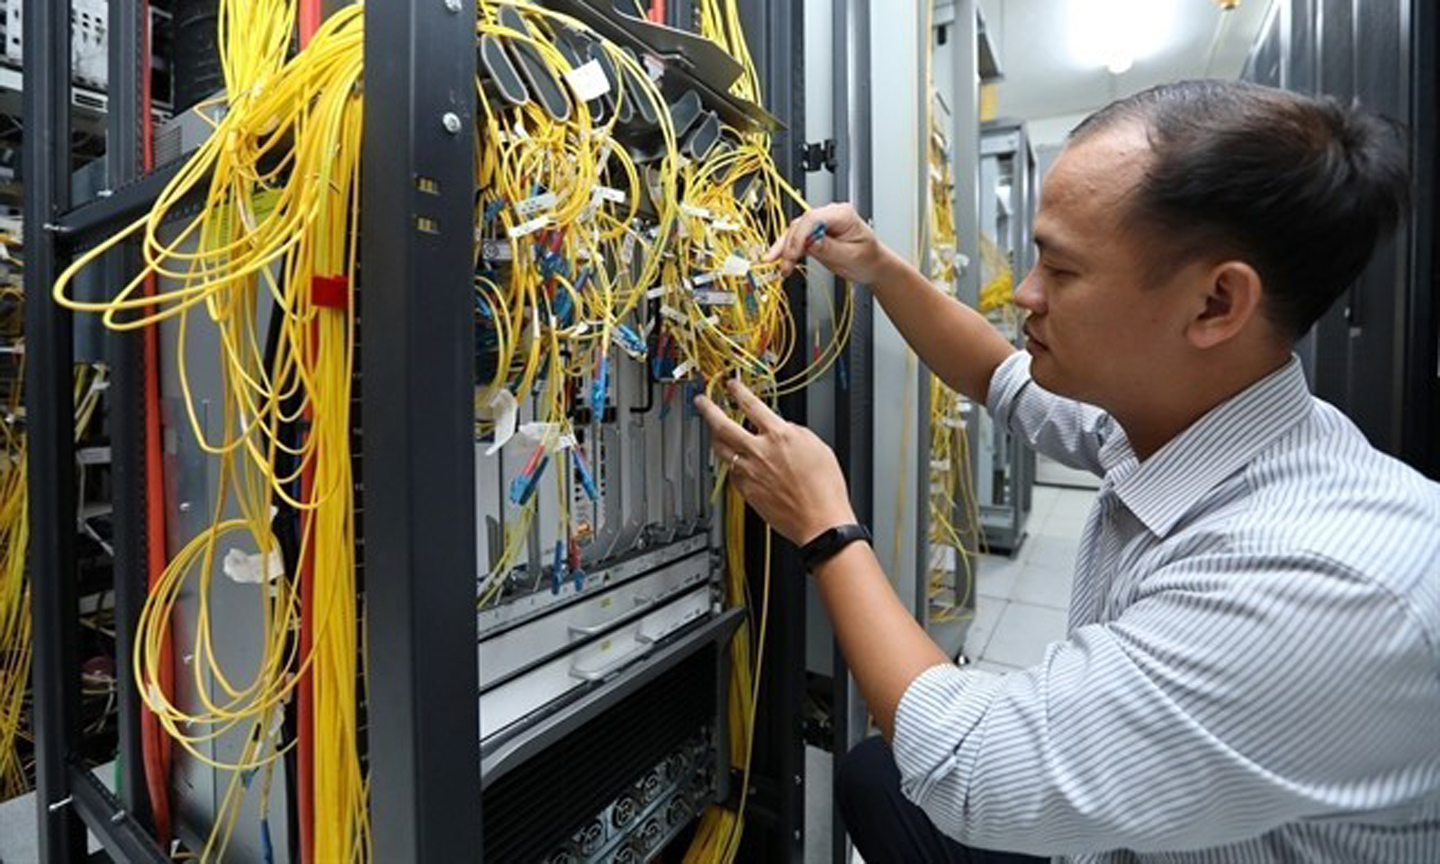 Vietnam to have 10 new undersea fibre optic cable lines